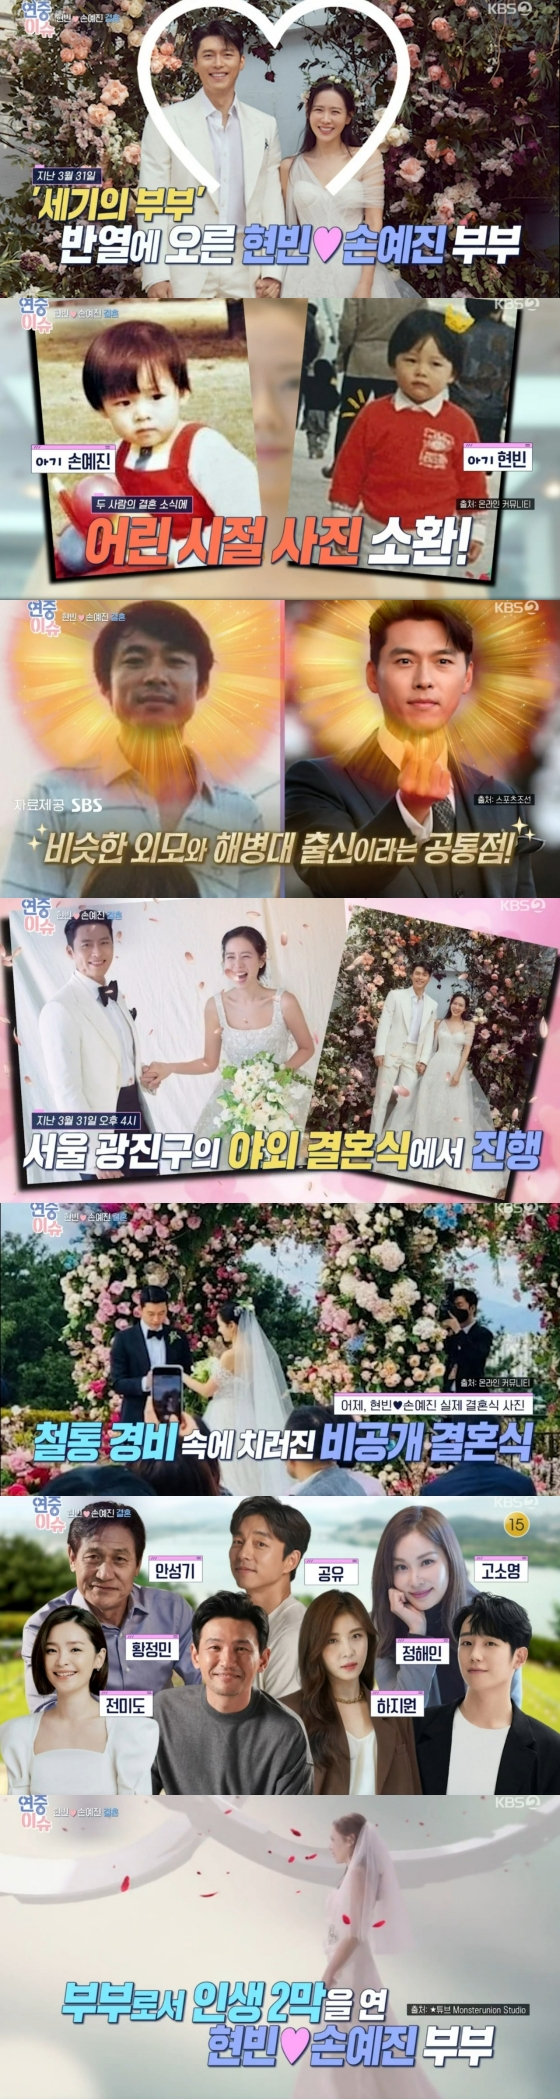 In the KBS 2TV love information program Year-round live broadcasted on the afternoon of the afternoon, we discussed the marriage news of the Hyun Bin and Son Ye-jin couple who became real lovers by Acting lovers in Drama On the day of Entertainment Weekly issue, we discussed the wedding news of the new couple, Hyun Bin and Son Ye-jin, who had a private wedding ceremony on the 31st.The two men, who were in the ranks of the couple of the century, caught their eye with their similar appearance from childhood.Especially, the common denominator of Son Ye-jins father and Hyun Bin was revealed and attracted attention.In addition, Year-round live said, The conversation was good in the private market, and the common denominator of golf made the two people closer.The lineup of the two guests, who signed a hundred years at an outdoor wedding ceremony in Gwangjin-gu, reminded me of the awards ceremony.Park Kyung-rim, who made a relationship with Hyun Bin and his close friend, Jang Dong-gun, and the society, was the first work of Hyun Bin and Son Ye-jin,The first part of the festival was also noted by spiders and Kim Bum-soo, and the second part was played by Paul Kim, who was reported to have received the news of his devotion.Finally, After my debut in my 20s, I have been steadily acting so far, so I am looking forward to the future.Son Ye-jin is about to make his way to Hollywood with the movie Cross, and Hyun Bin is about to release Negotiation and Cooperation 2.I look forward to more active activities with marriage. 